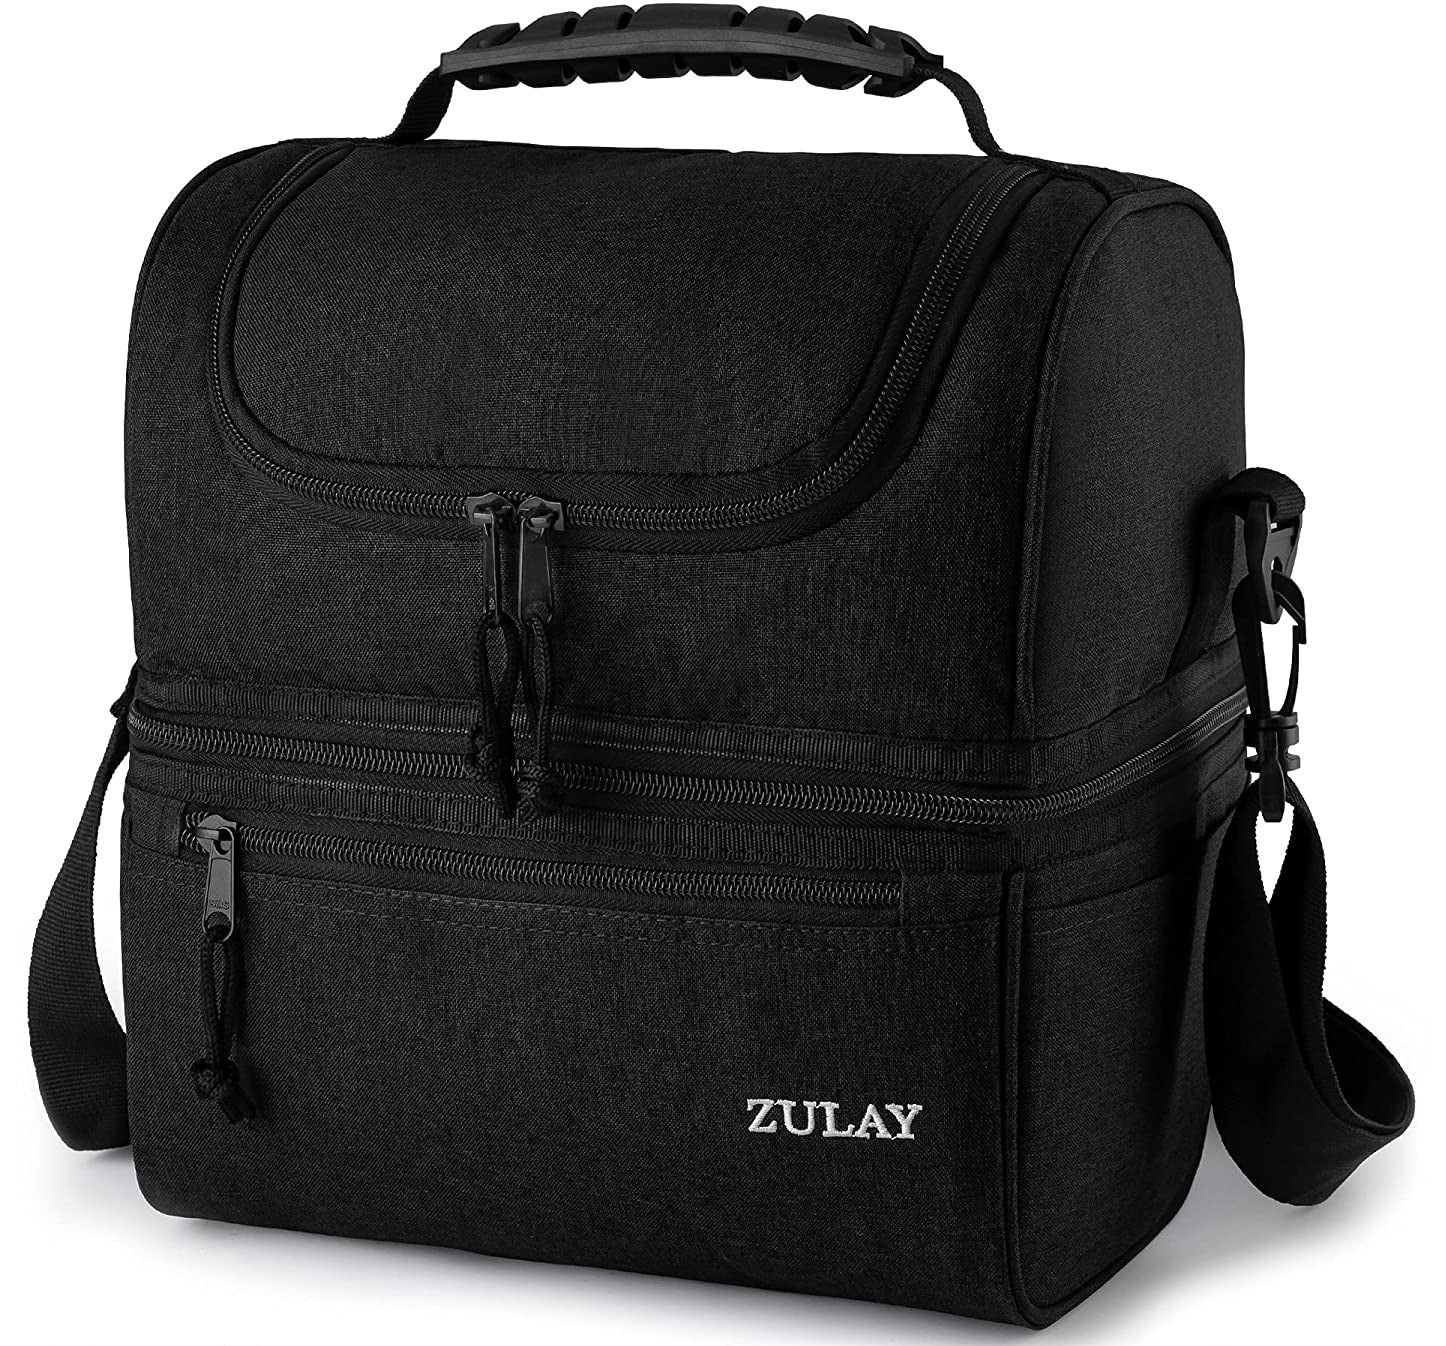 Insulated 2-Compartment Lunch Box Bag With Strap - Zulay KitchenZulay Kitchen